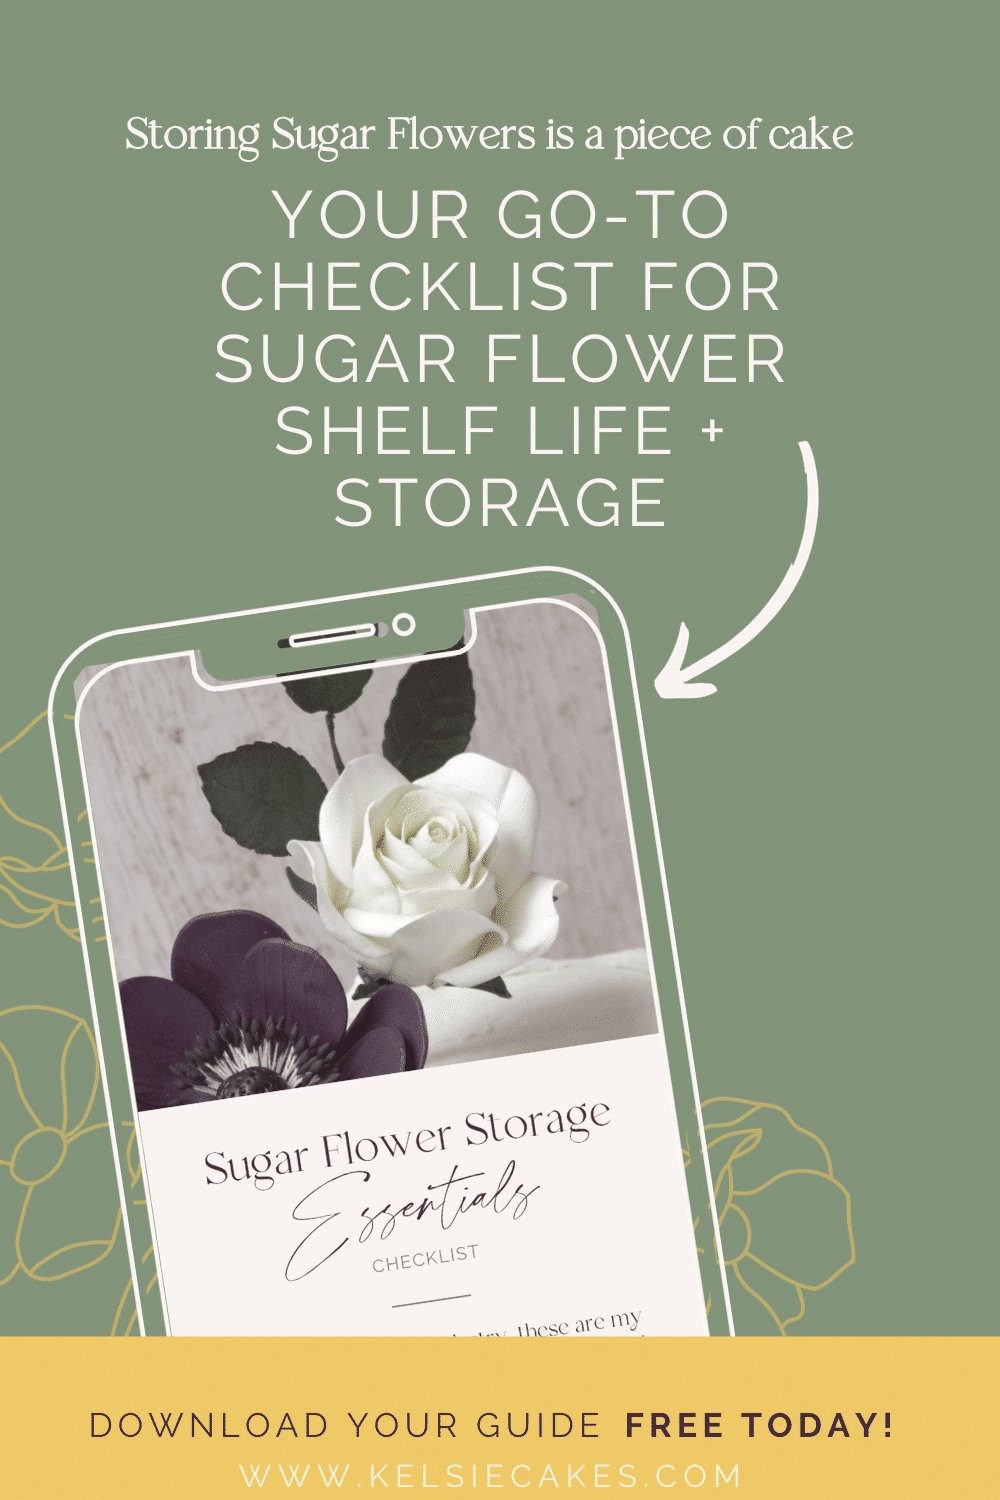 Your go-to checklist for sugar flower storage and shelf life with an image of a sugar flower anemone displayed on an iphone screen mockup